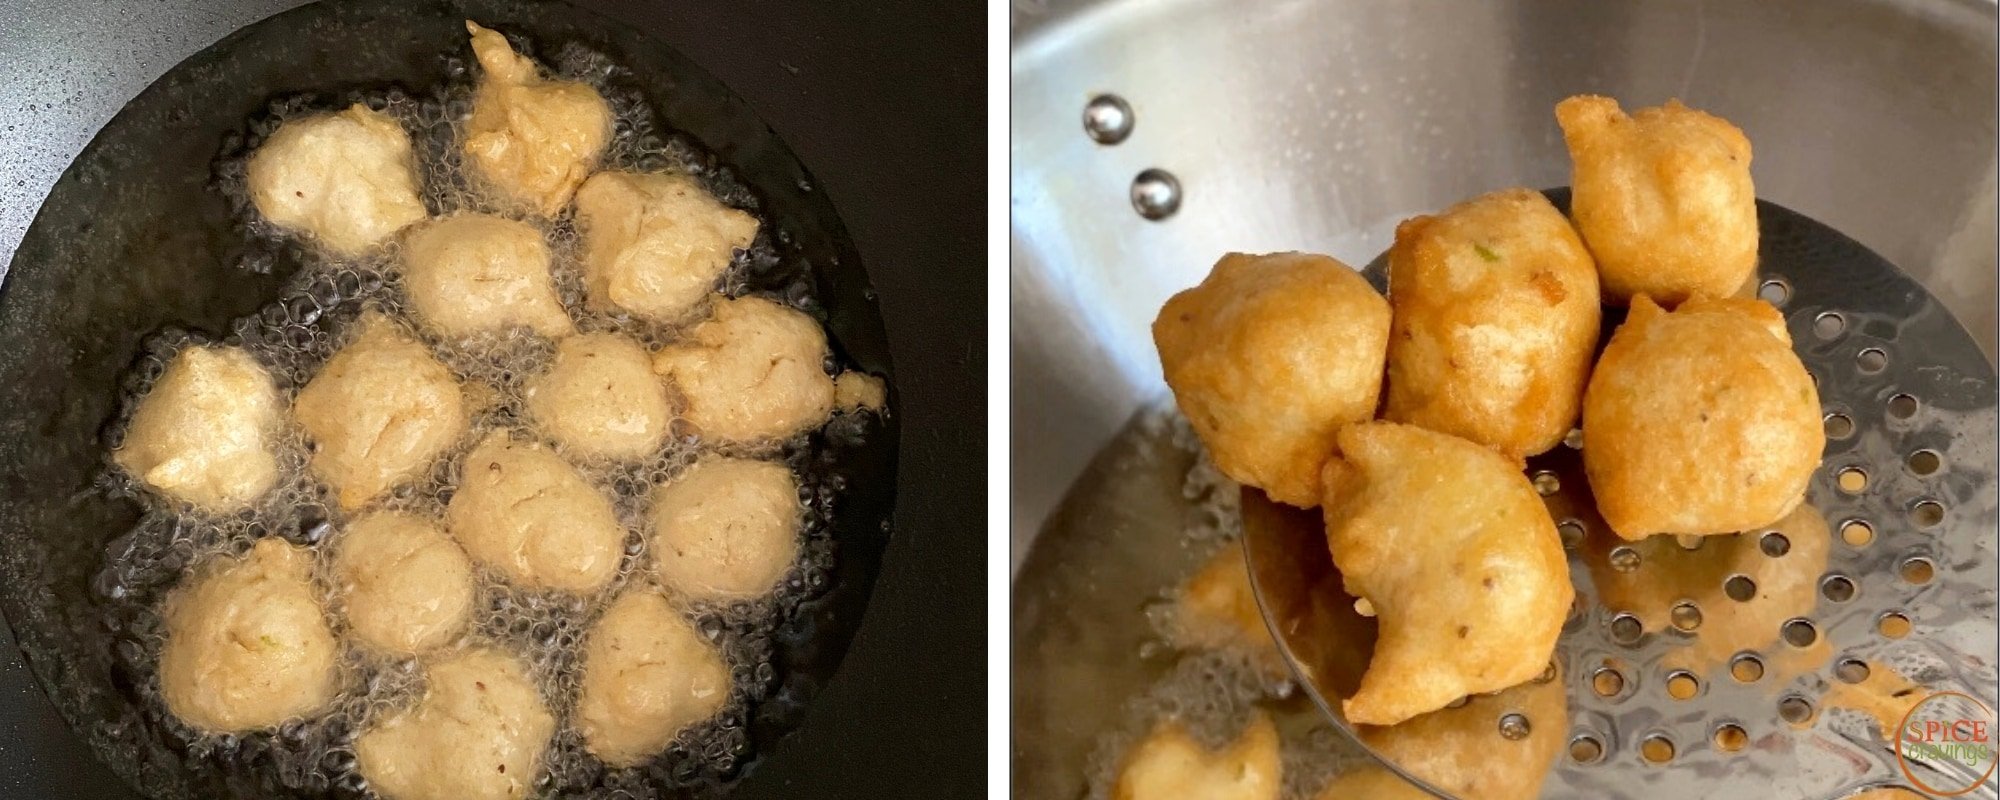 Left shot showing frying vadas in oil, right shot shows ladle scooping out fried vadas